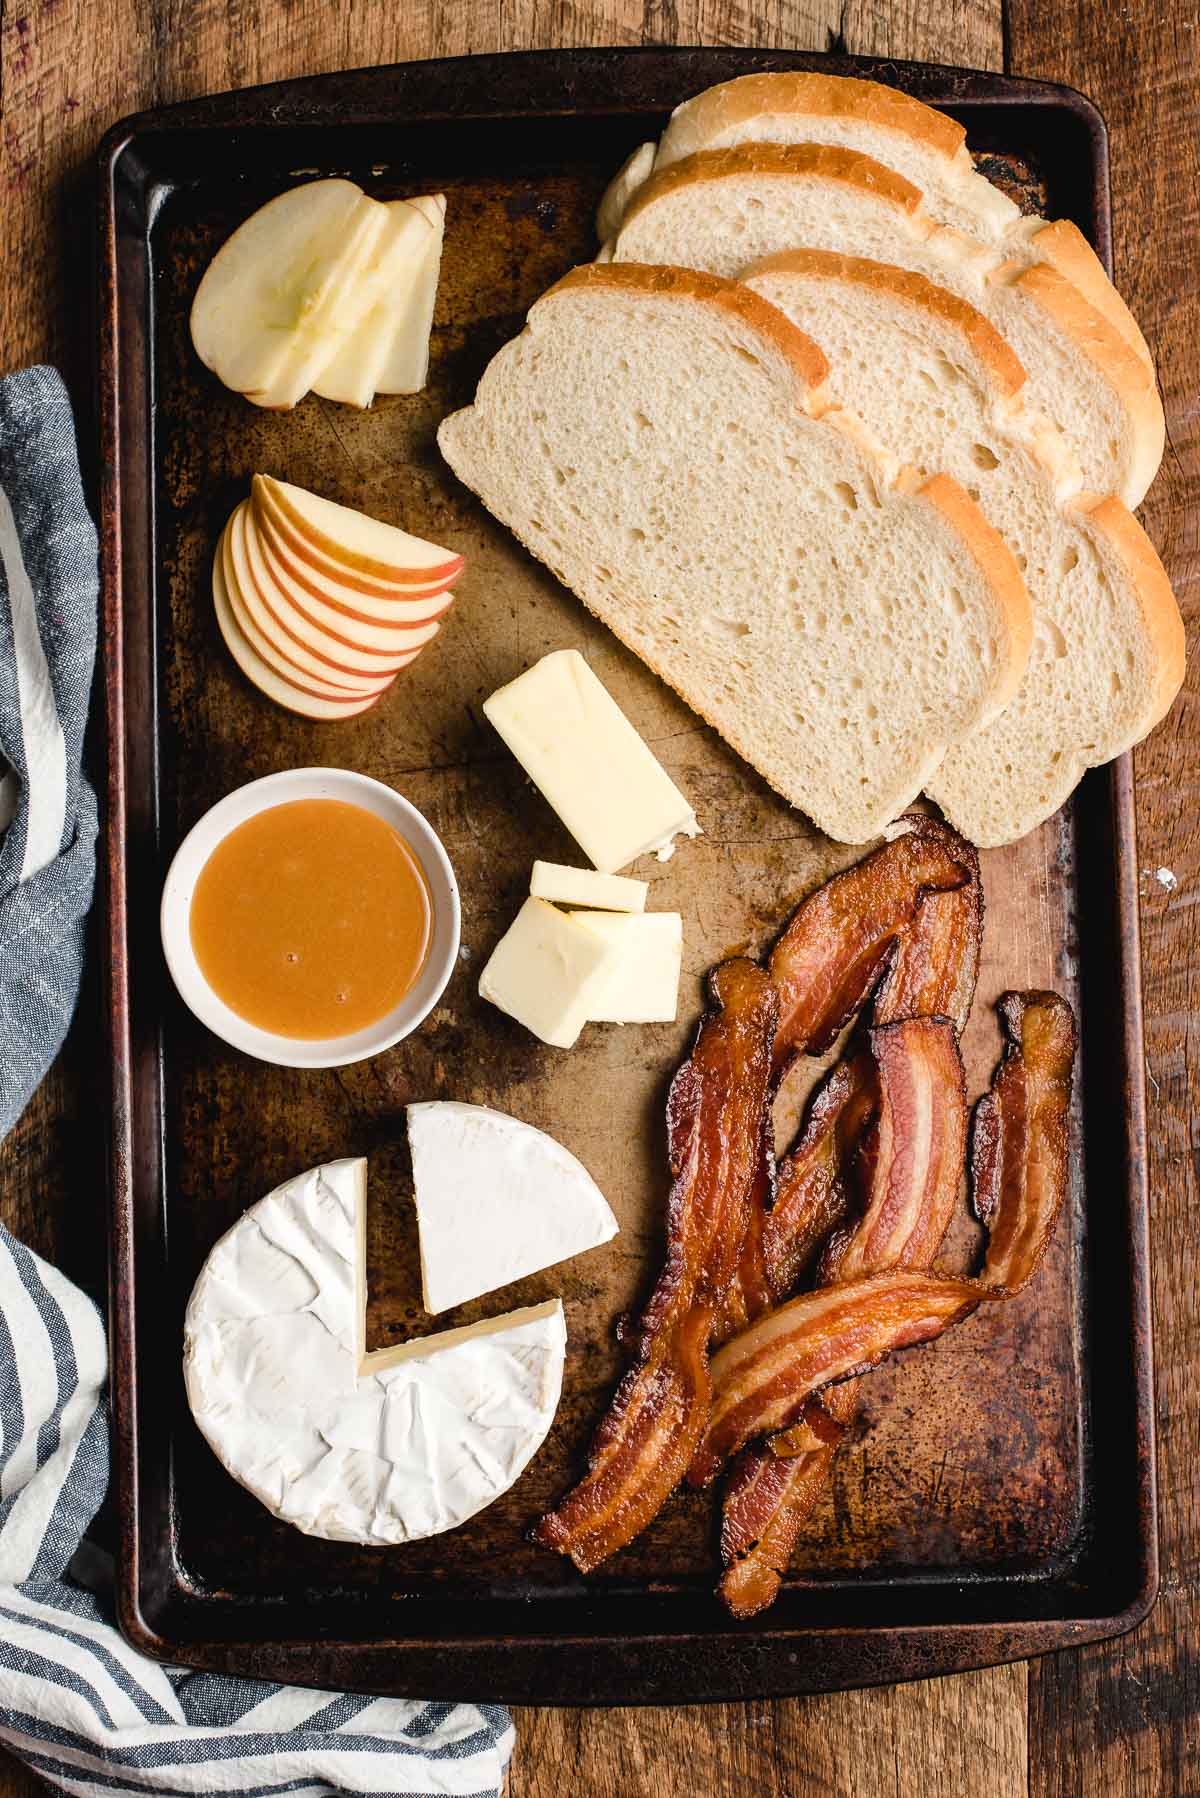 Sheet pan filled with ingredients for grilled cheese: sliced white bread, apple slices, butter, cooked bacon, honey mustard, and a wheel of brie cheese.